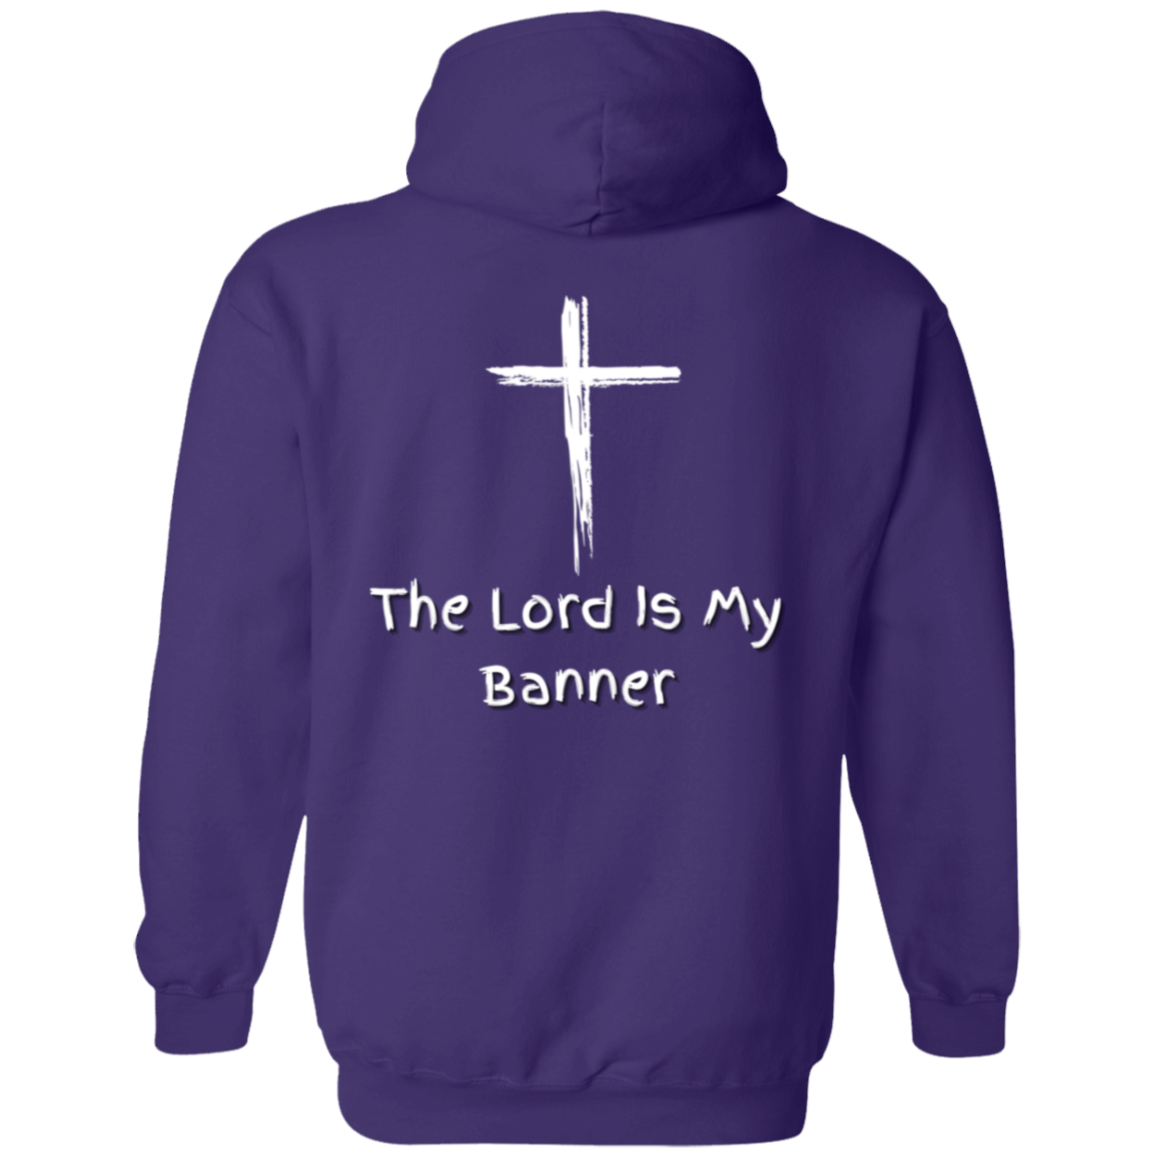 Jehovah Nissi Pullover Hoodie Front & Back - White